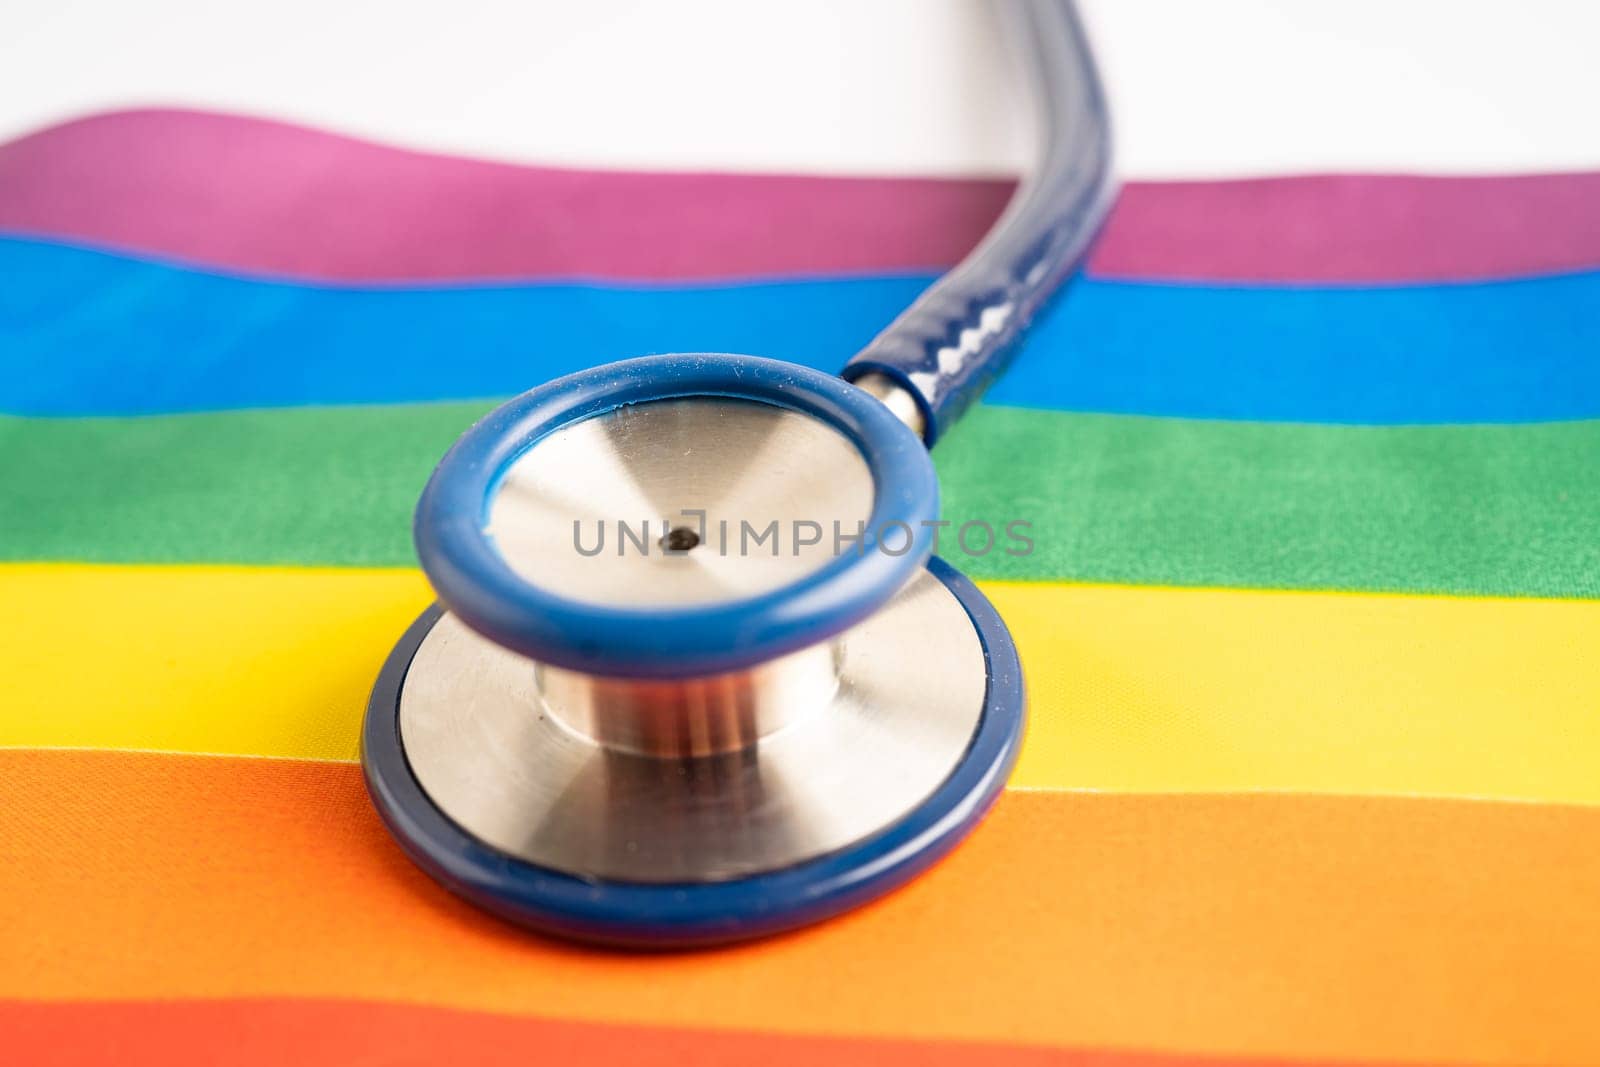 Black stethoscope on rainbow flag background, symbol of LGBT pride month celebrate annual in June social, symbol of gay, lesbian, bisexual, transgender, human rights and peace. by pamai